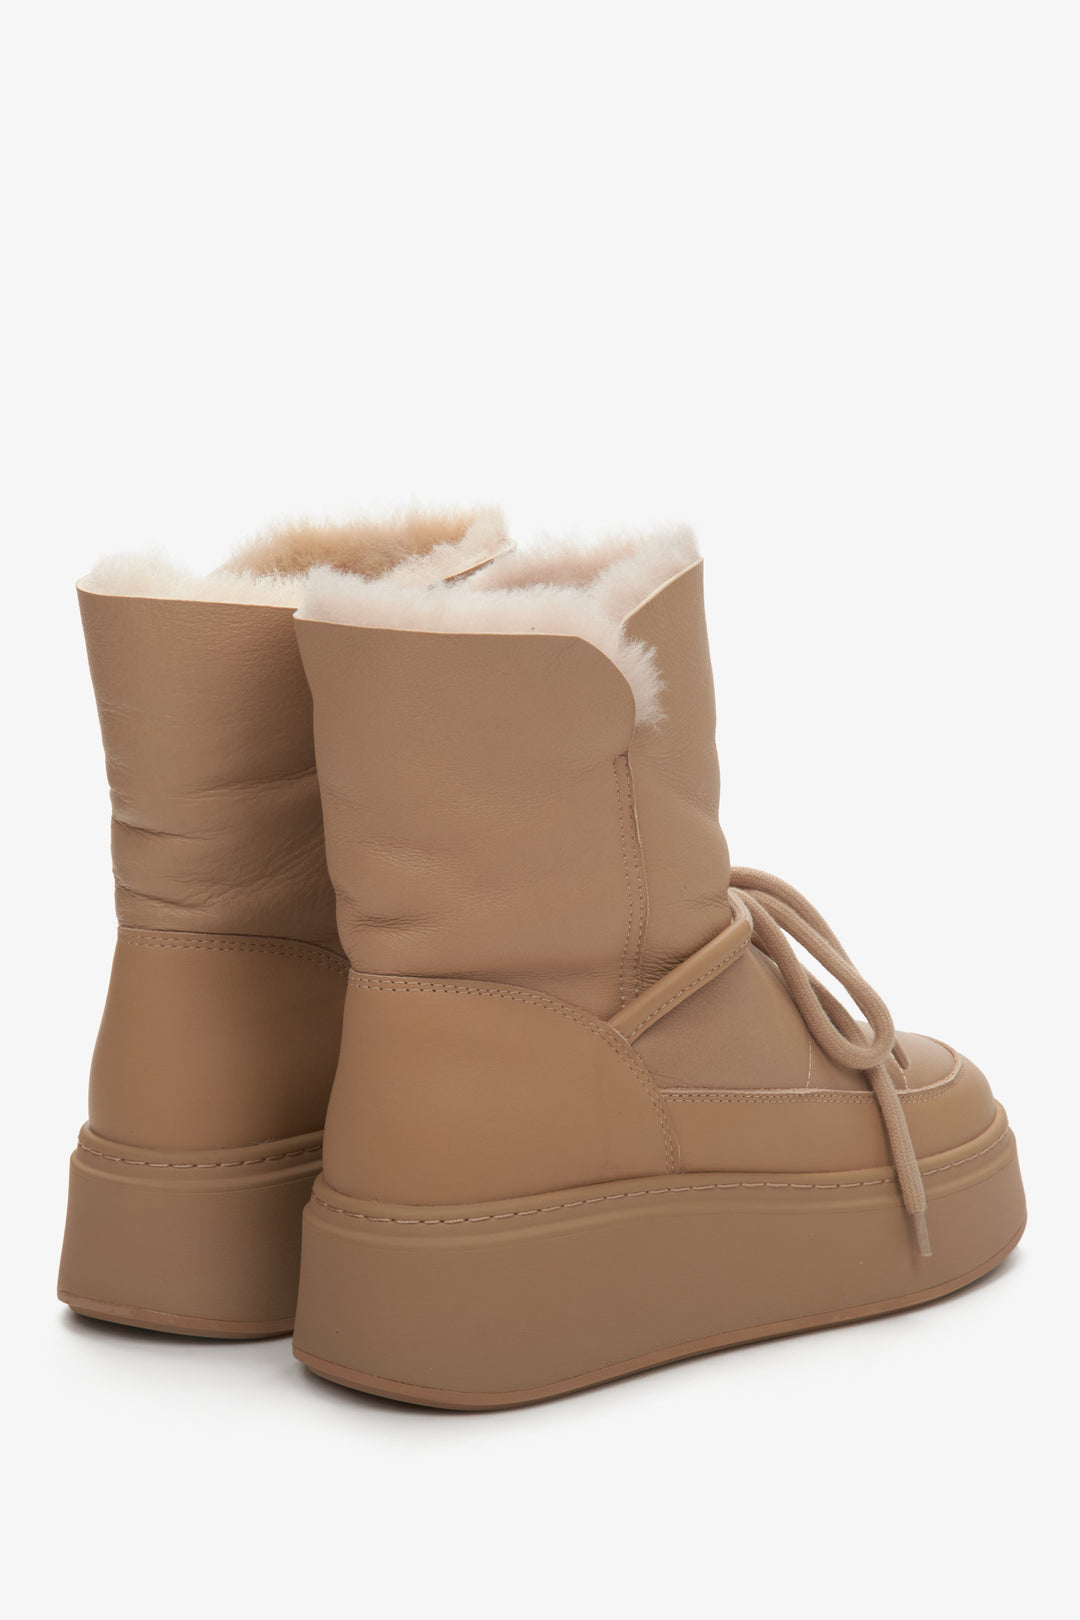 Fur lined snow boots in brown Estro - a close-up on sideline and back of the shoes.